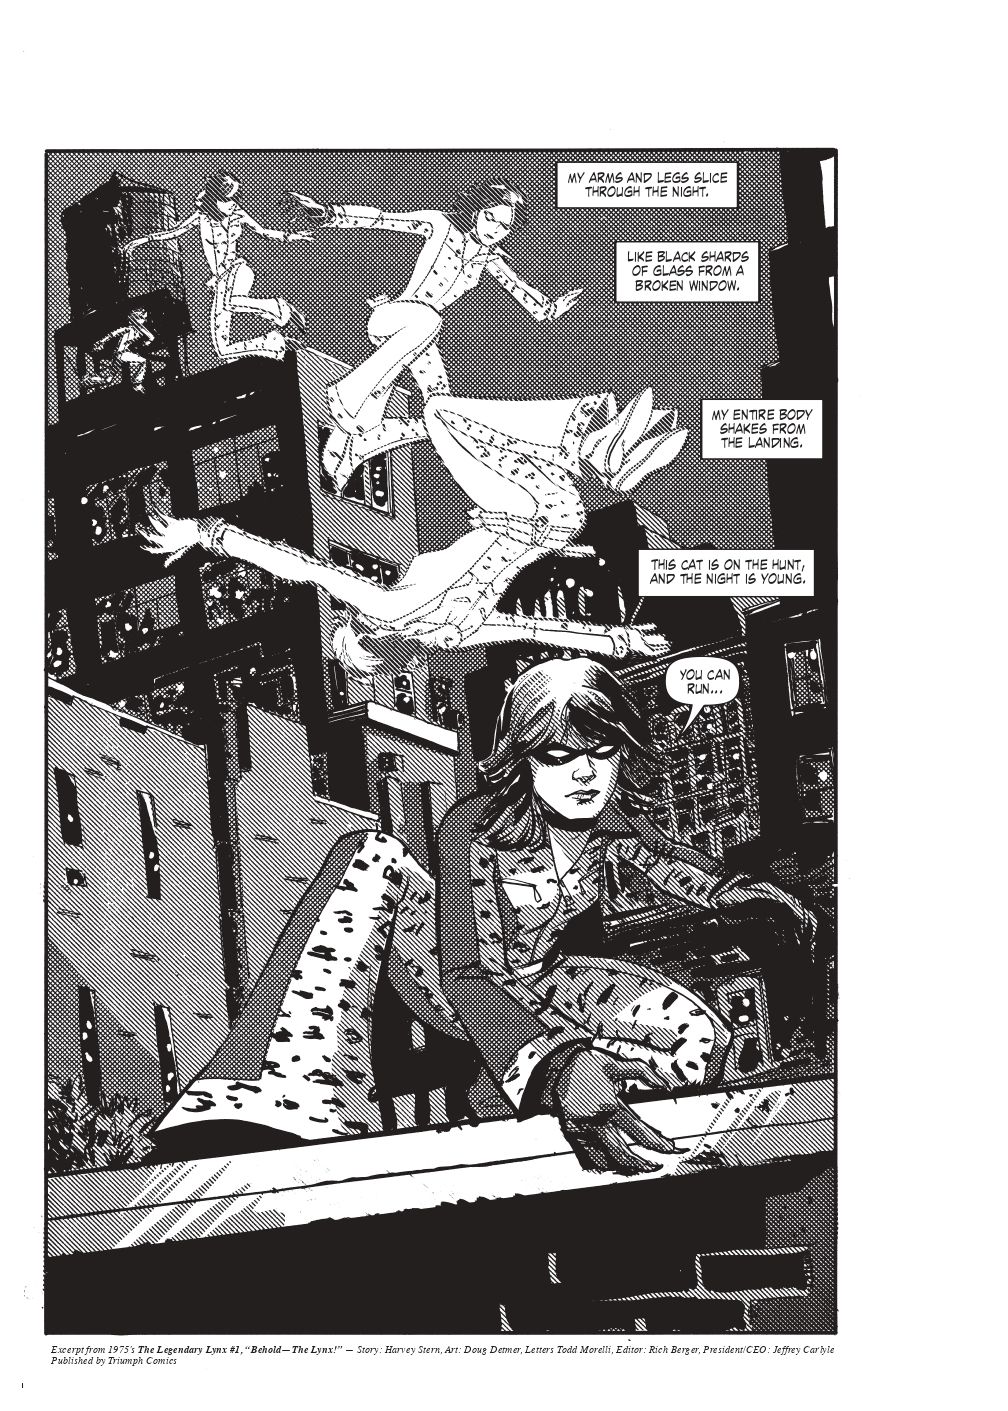 A comic-page spread of “The Lethal Lynx” from Alex Segura’s Secret Identity.